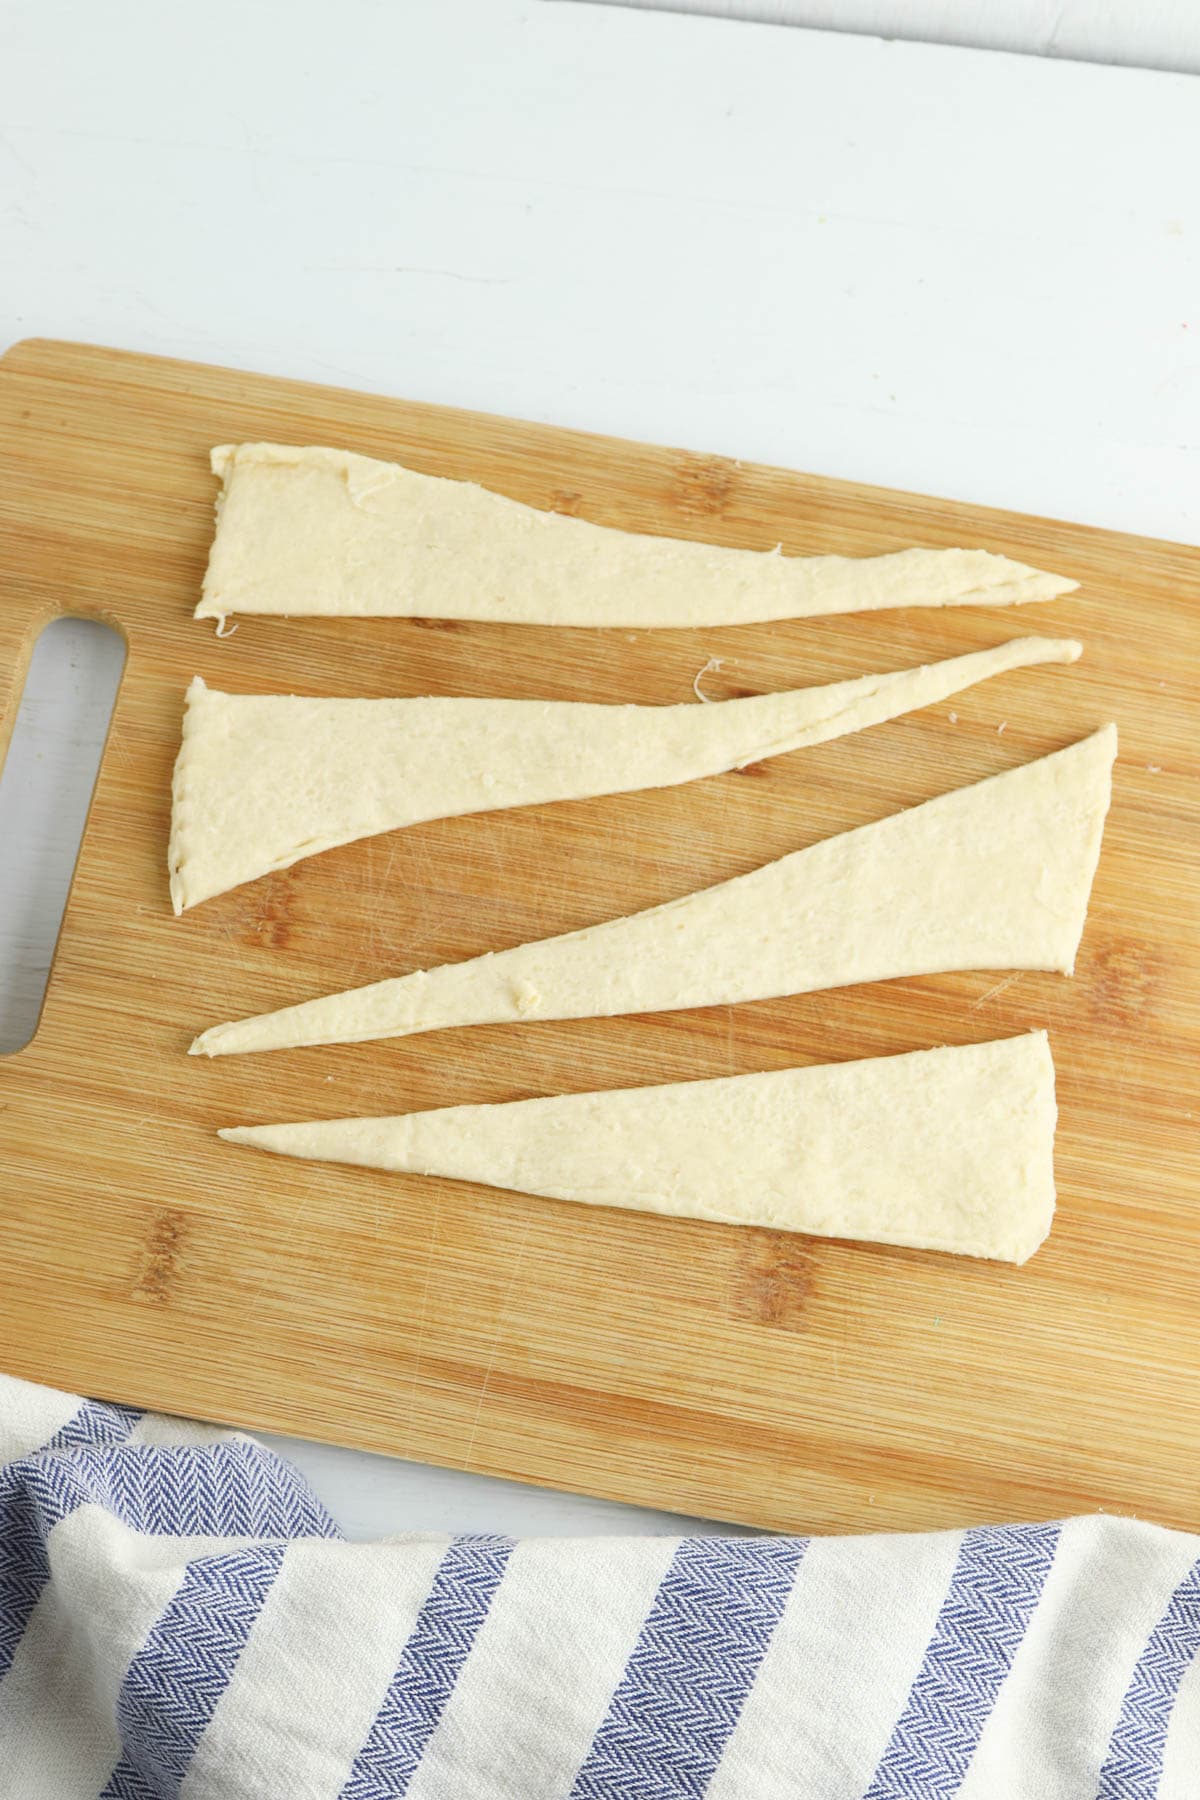 Crescent rolls cut in half lengthwise on wooden board